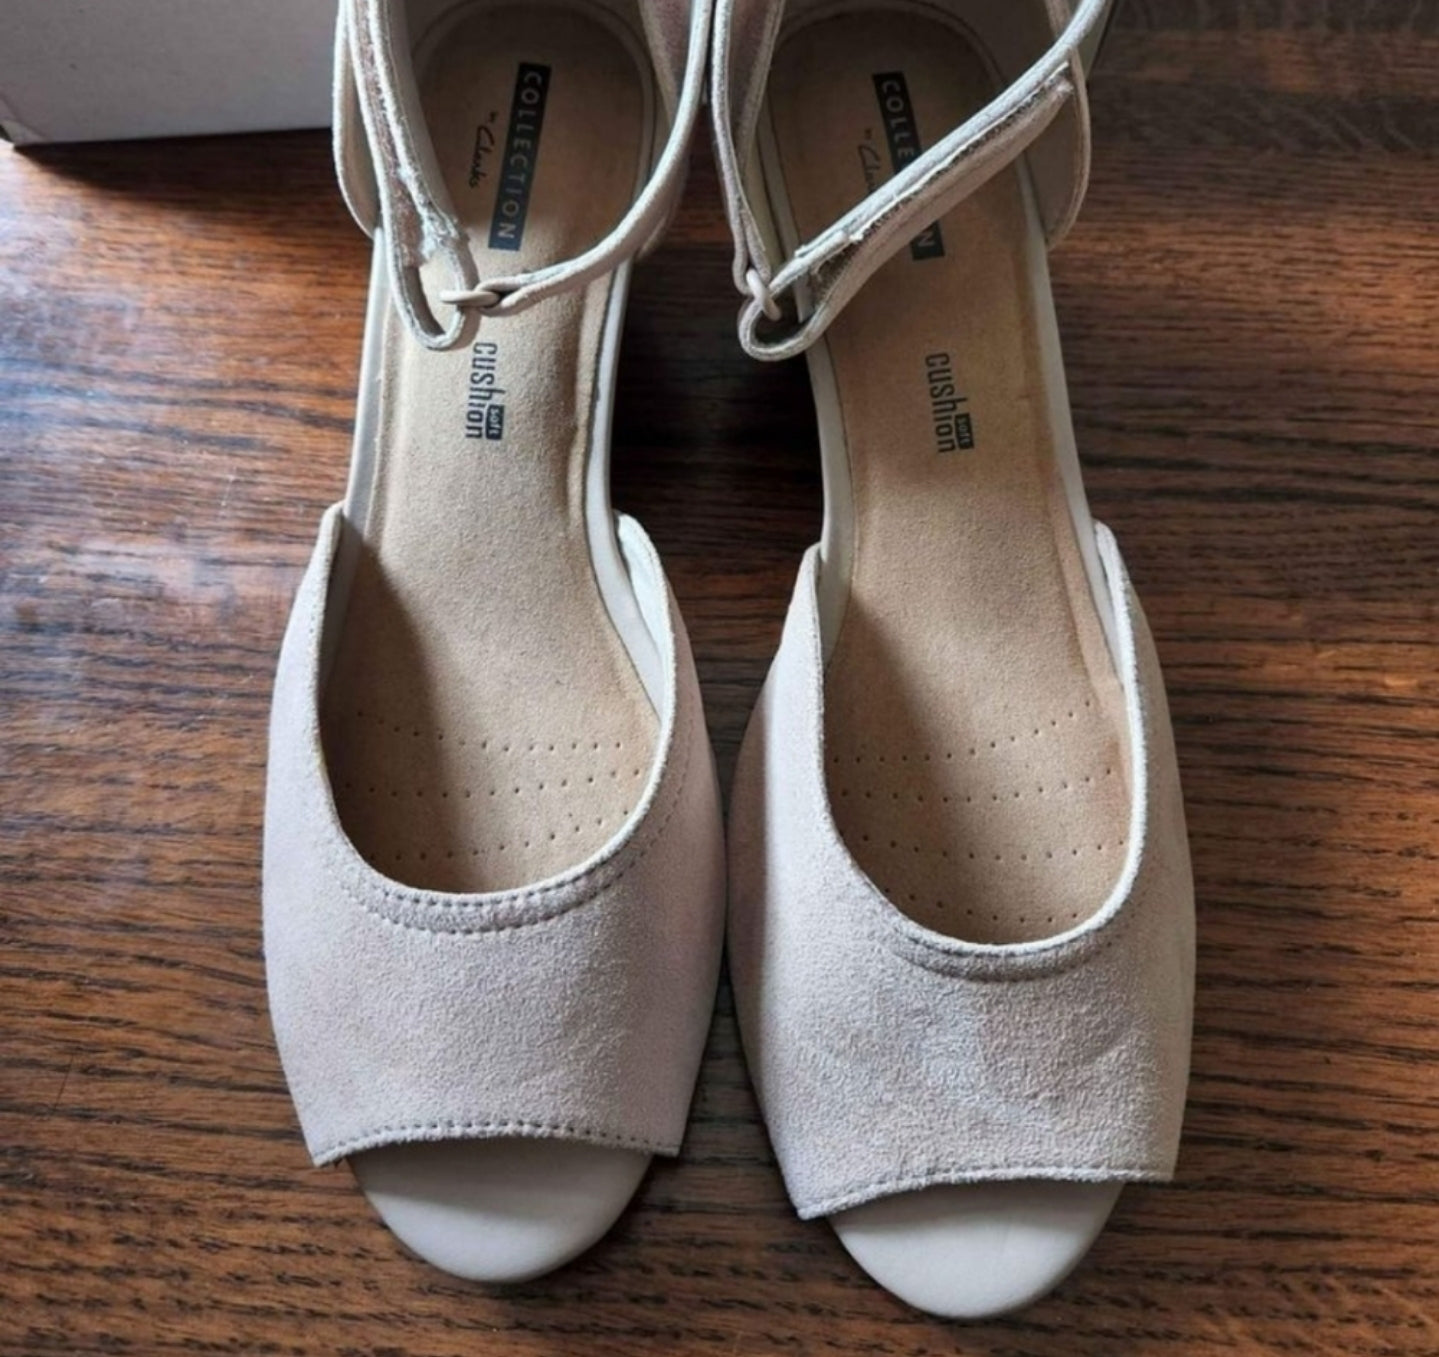 Clarks Leather Wedge Shoes Jamaica Bargain Boutique